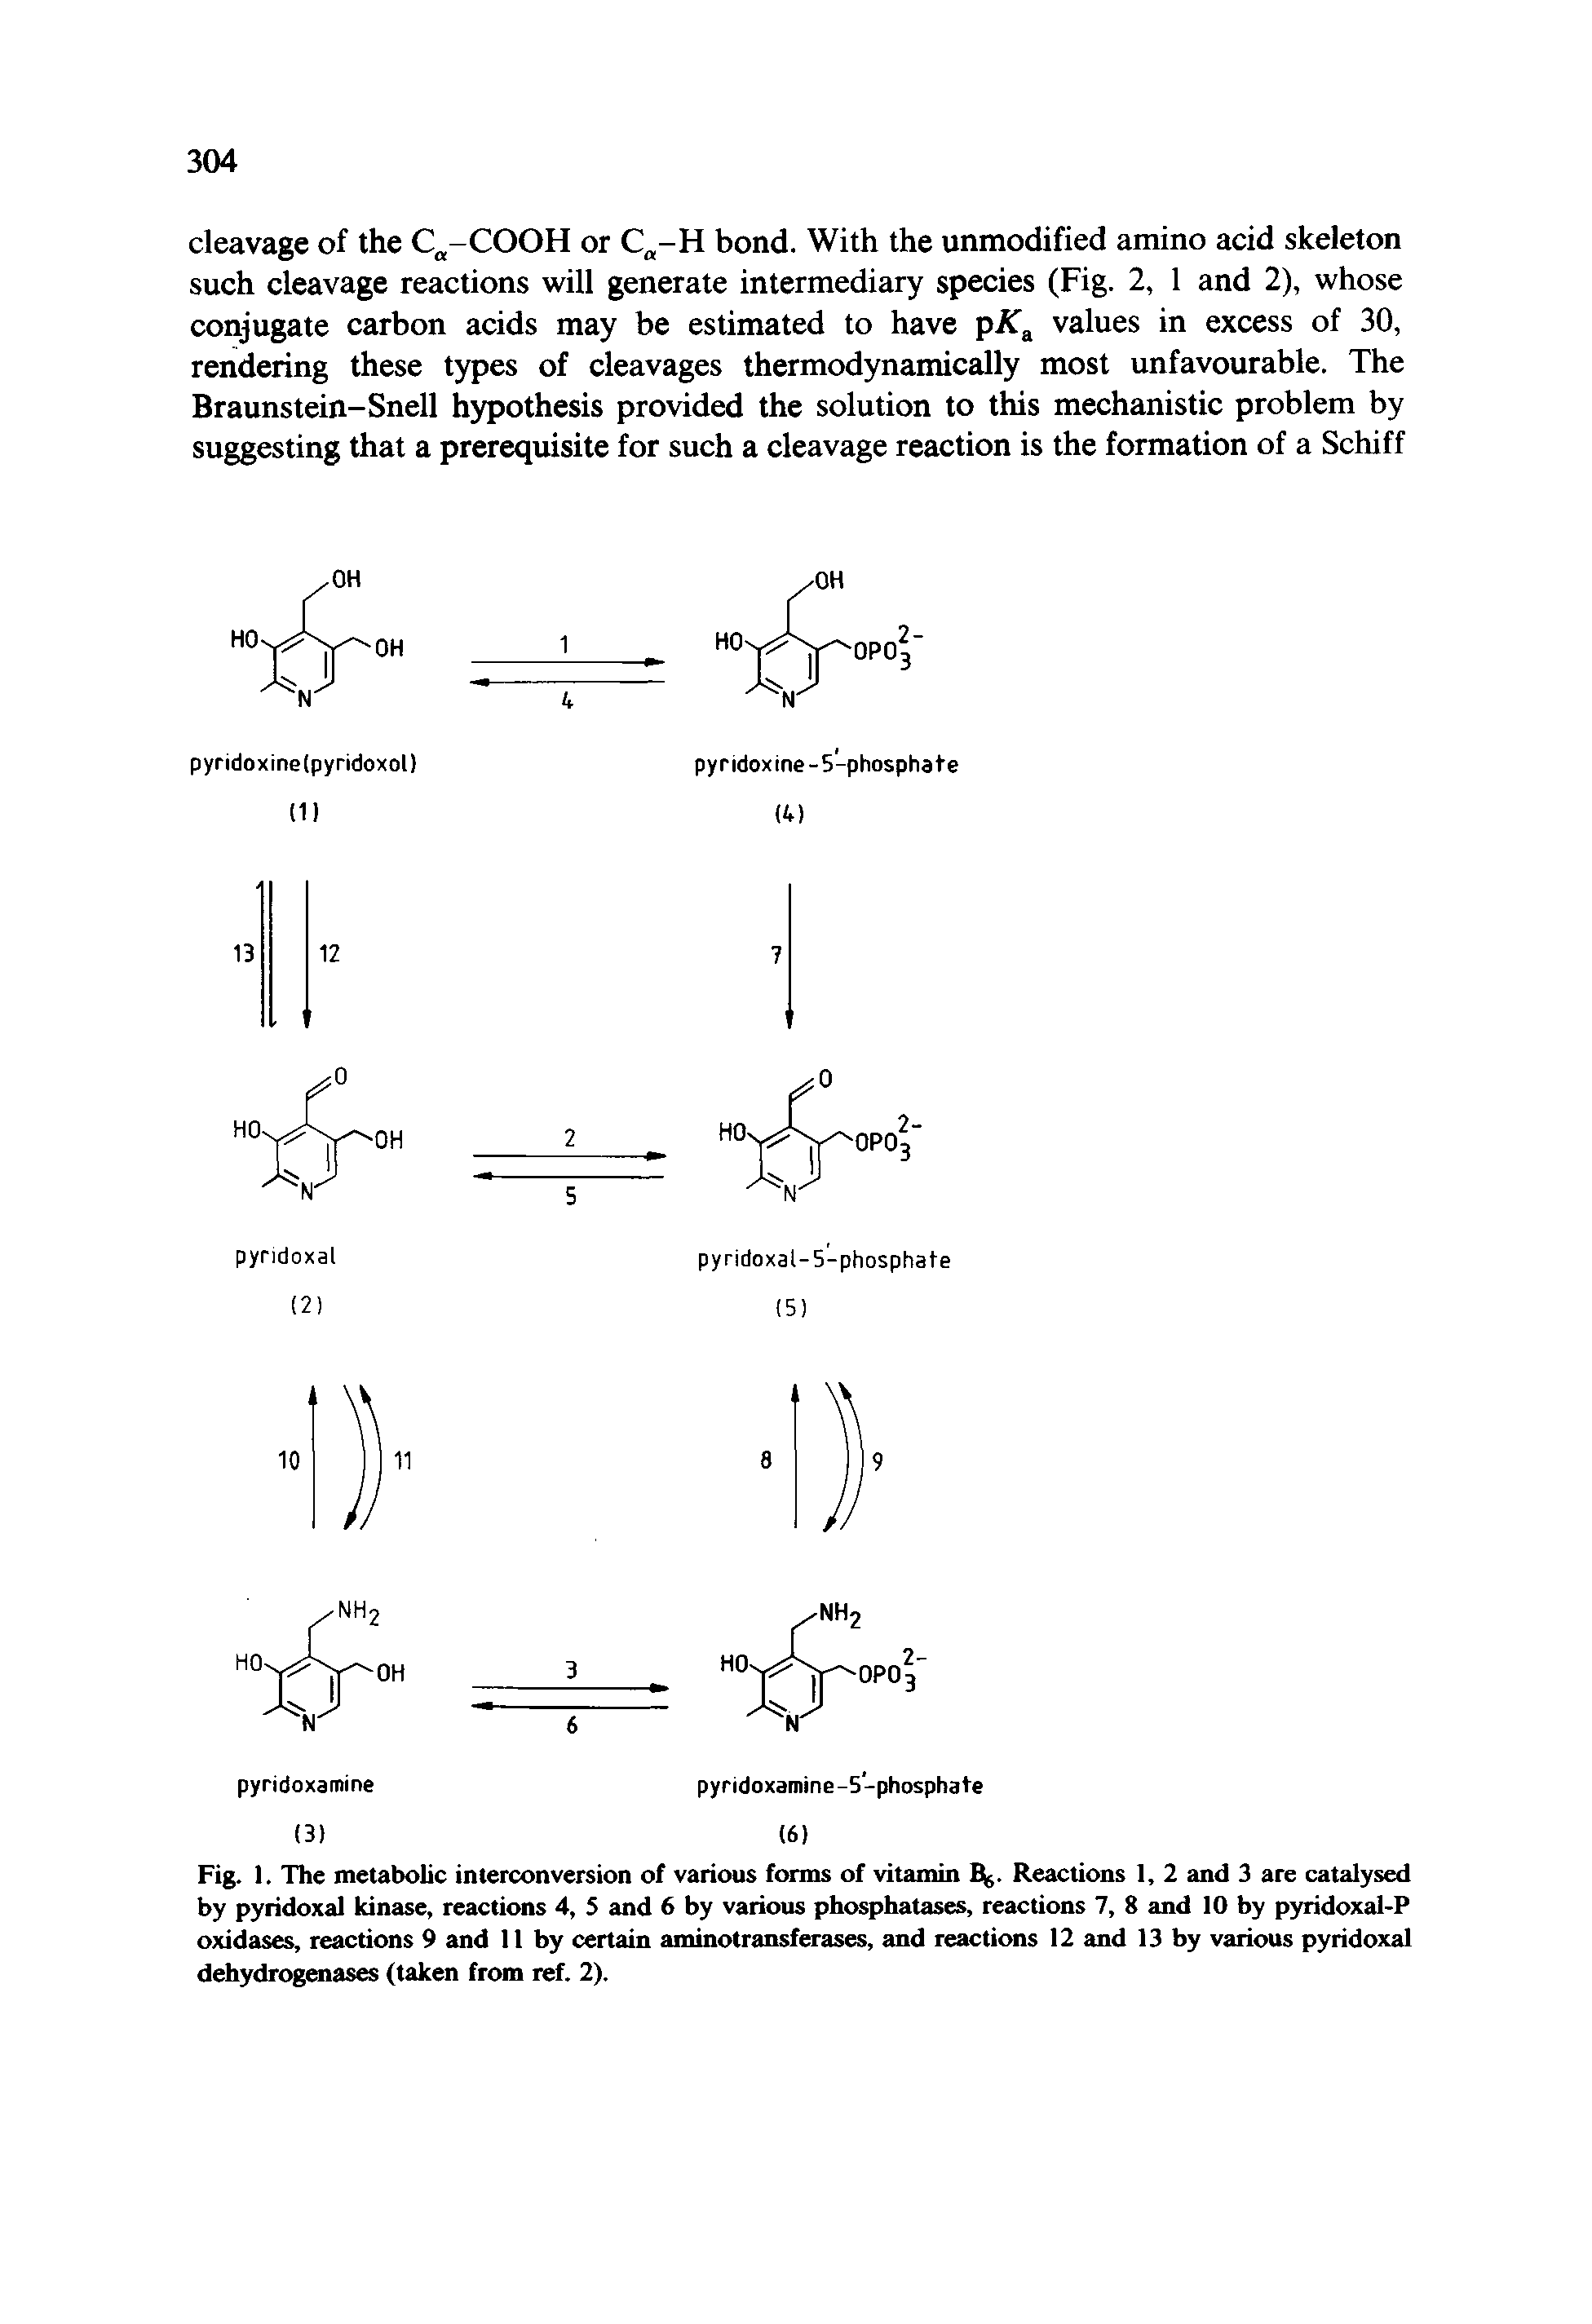 Fig. 1. The metabolic interconversion of various forms of vitamin Bg. Reactions 1, 2 and 3 are catalysed by pyridoxal kinase, reactions 4, S and 6 by various phosphatases, reactions 7, 8 and 10 by pyridoxal-P oxidases, reactions 9 and 11 by certain aminotransferases, and reactions 12 and 13 by various pyridoxal dehydrogenases (taken from ref. 2).